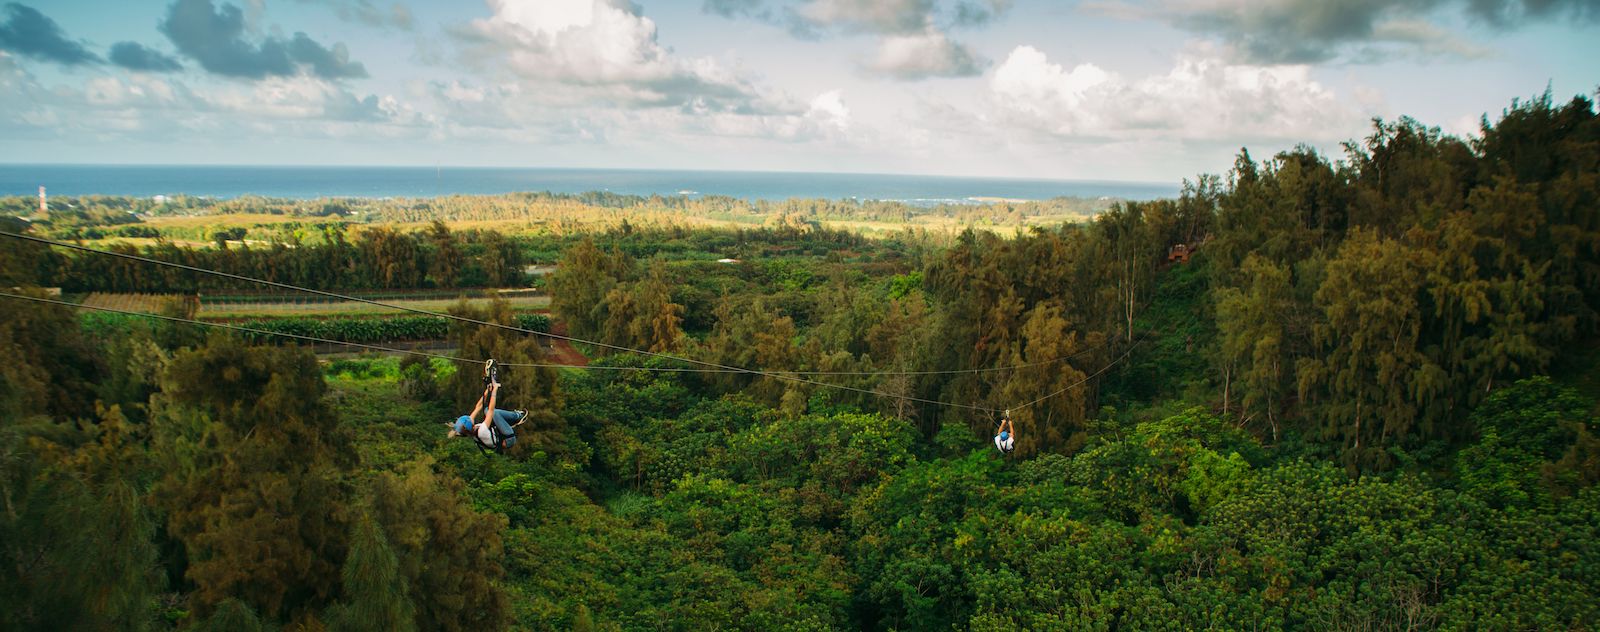 4 Reasons Our Ziplines in Hawaii are the Best Way to Experience the Beauty of Oahu’s North Shore